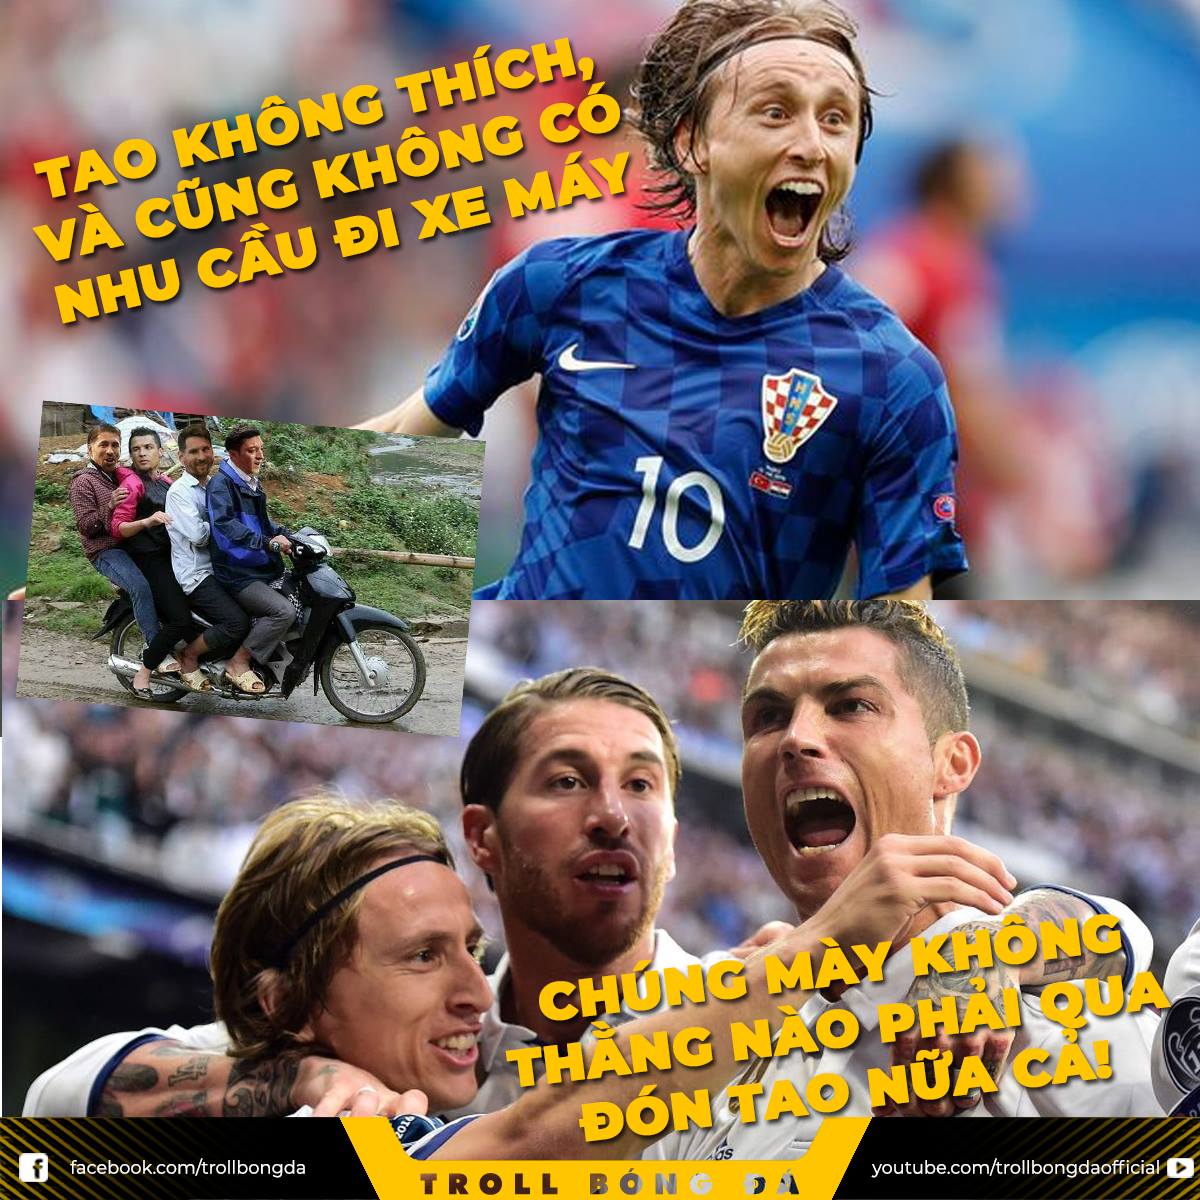 Croatia’s Luka Modric refusing an invitation to jump on the back of Ronaldo and Ramos’s motorbike, after his team eliminated Denmark on penalties on Monday’s game.